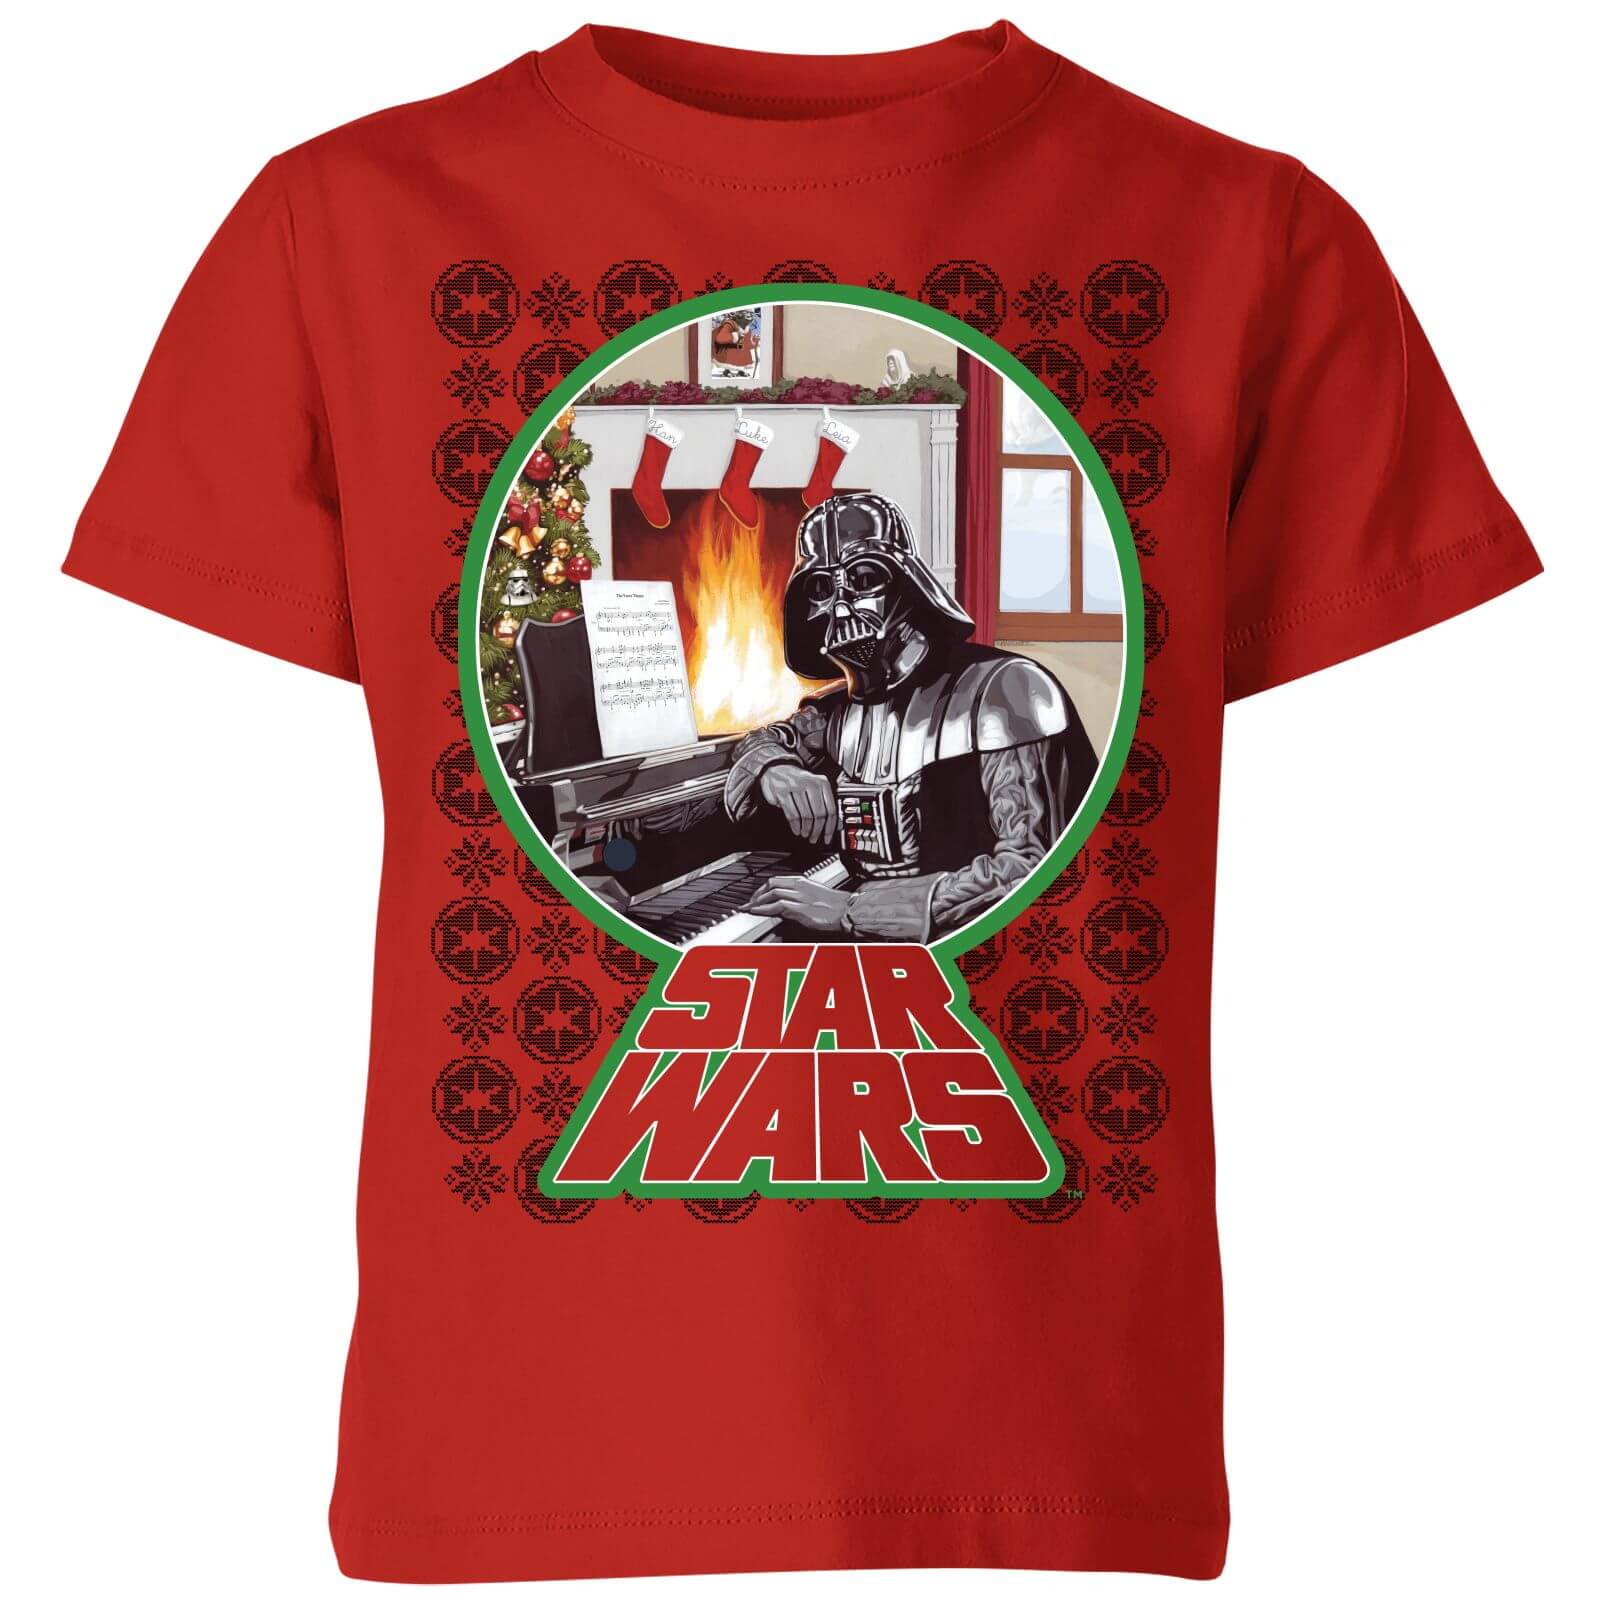 Star Wars A Very Merry Sithmas Kids Christmas T-Shirt - Red - 11-12 Years